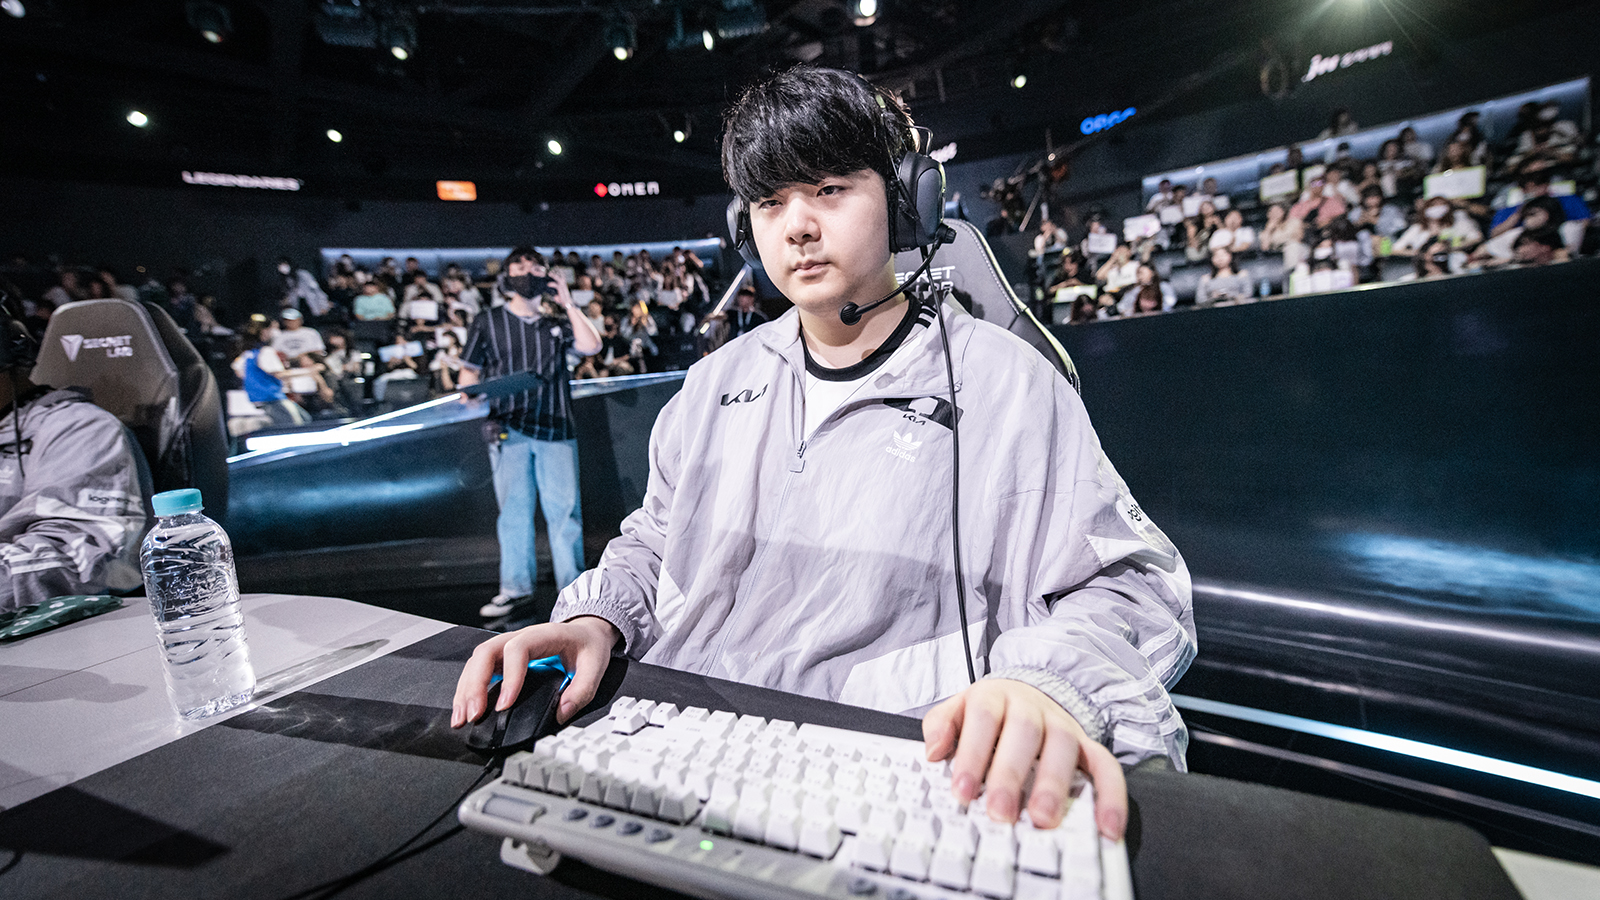 Canyon: The World’s Most Sought-After eSports Jungler and His Potential Future Teams